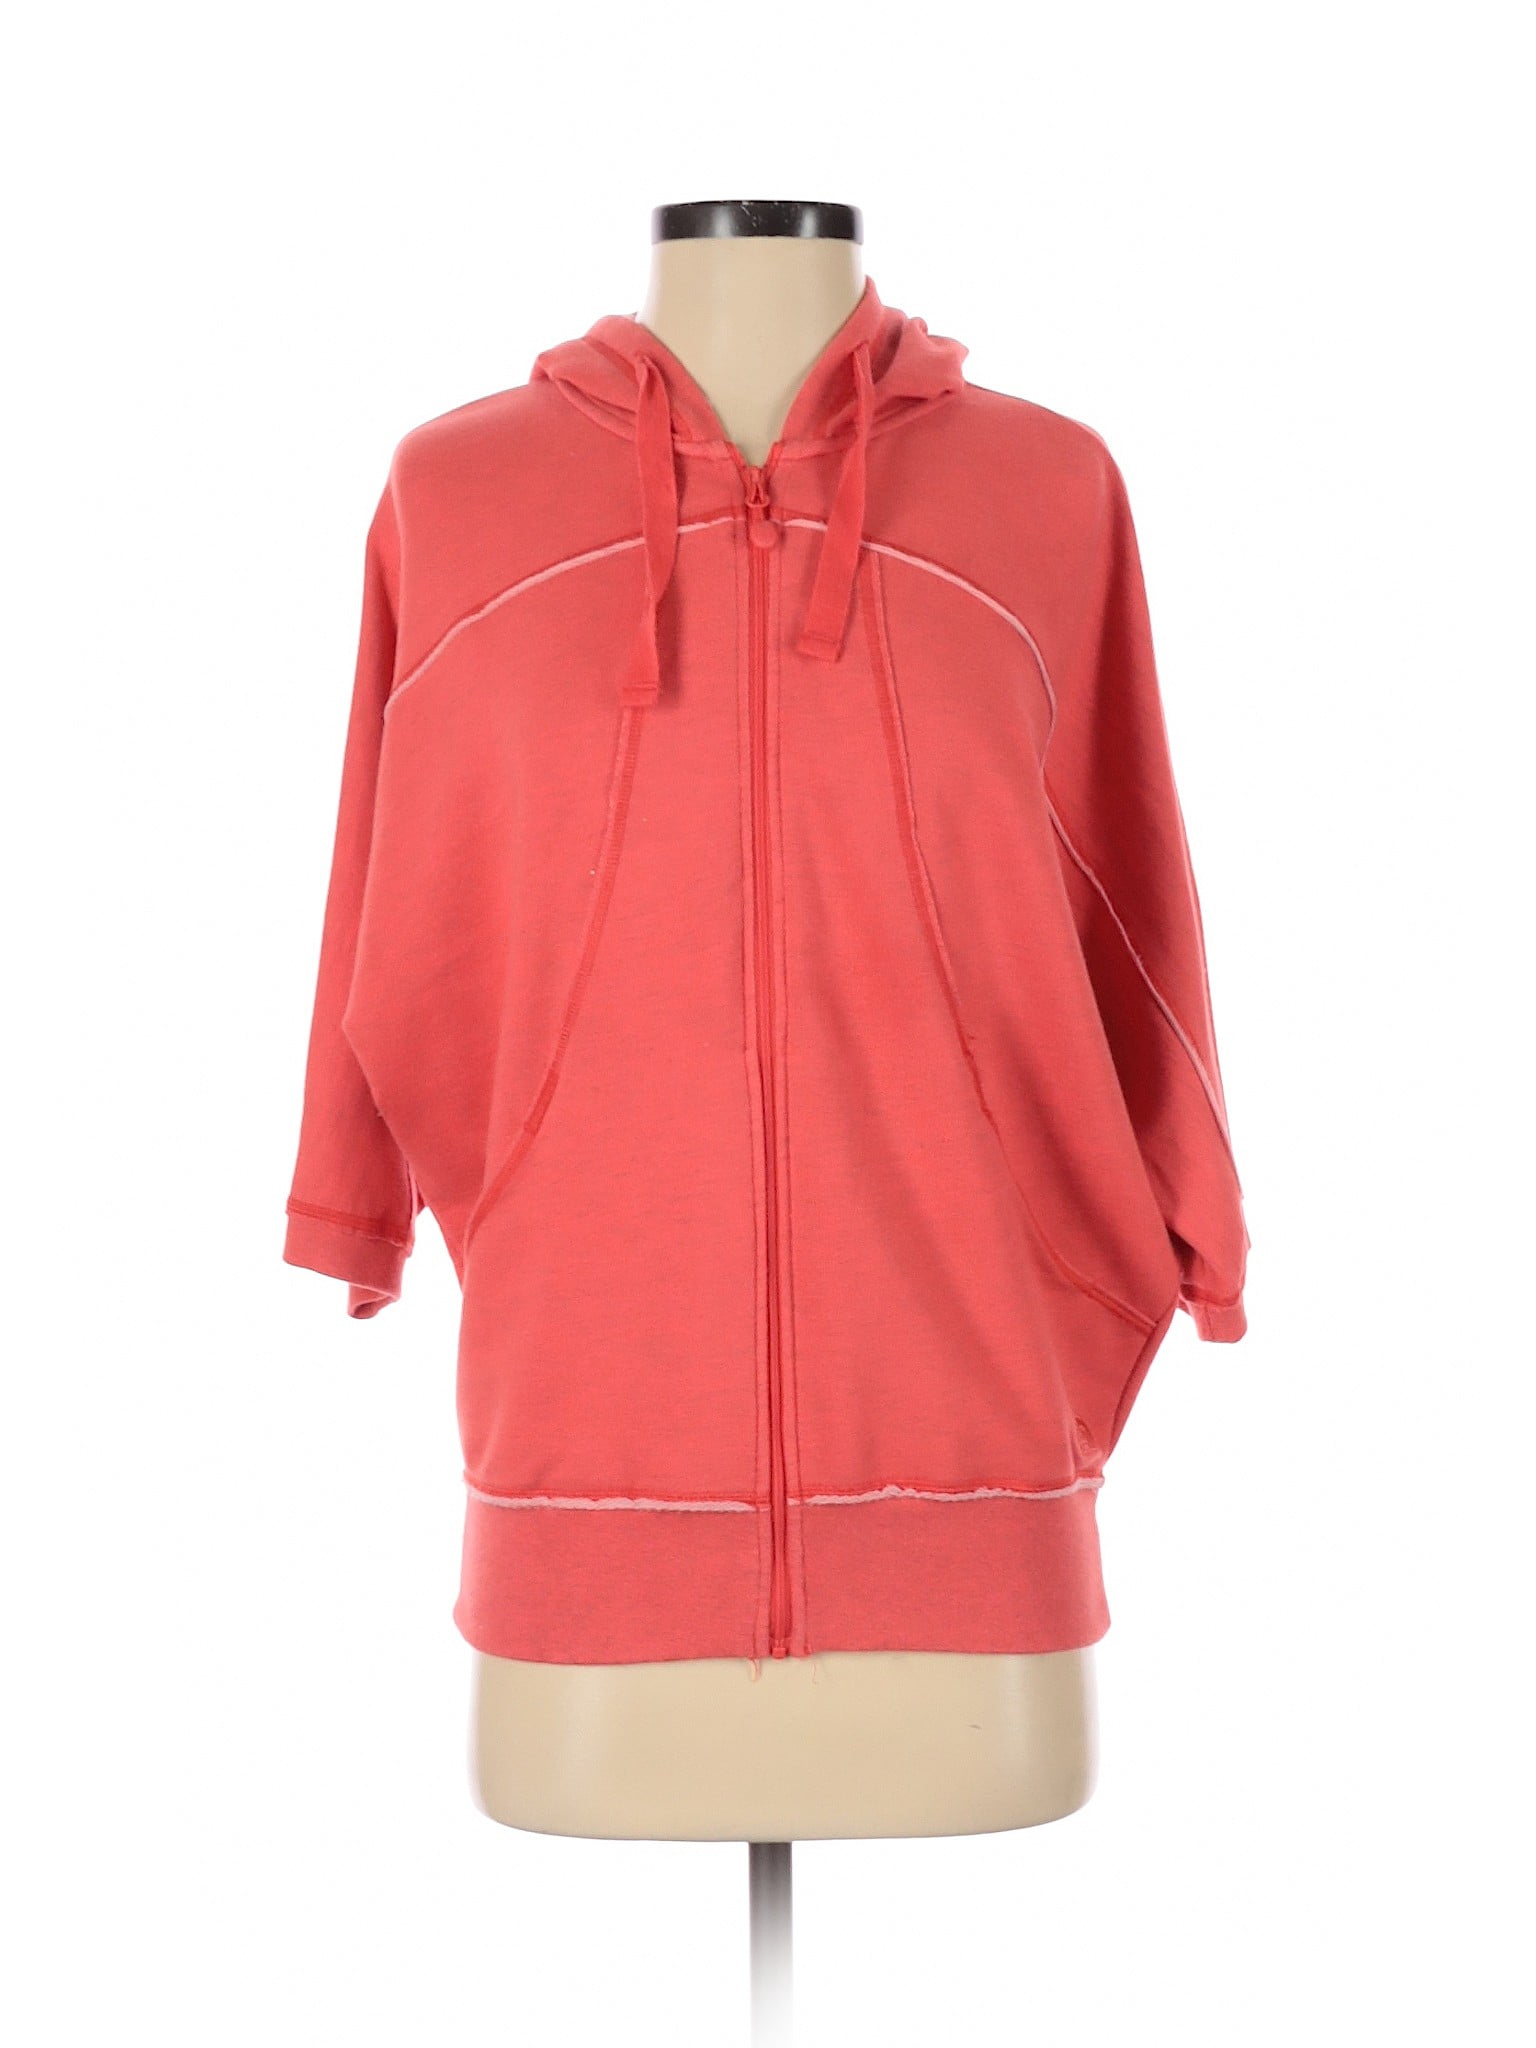 Orange theory - Pre-Owned Orange theory Women's Size S Zip Up Hoodie ...